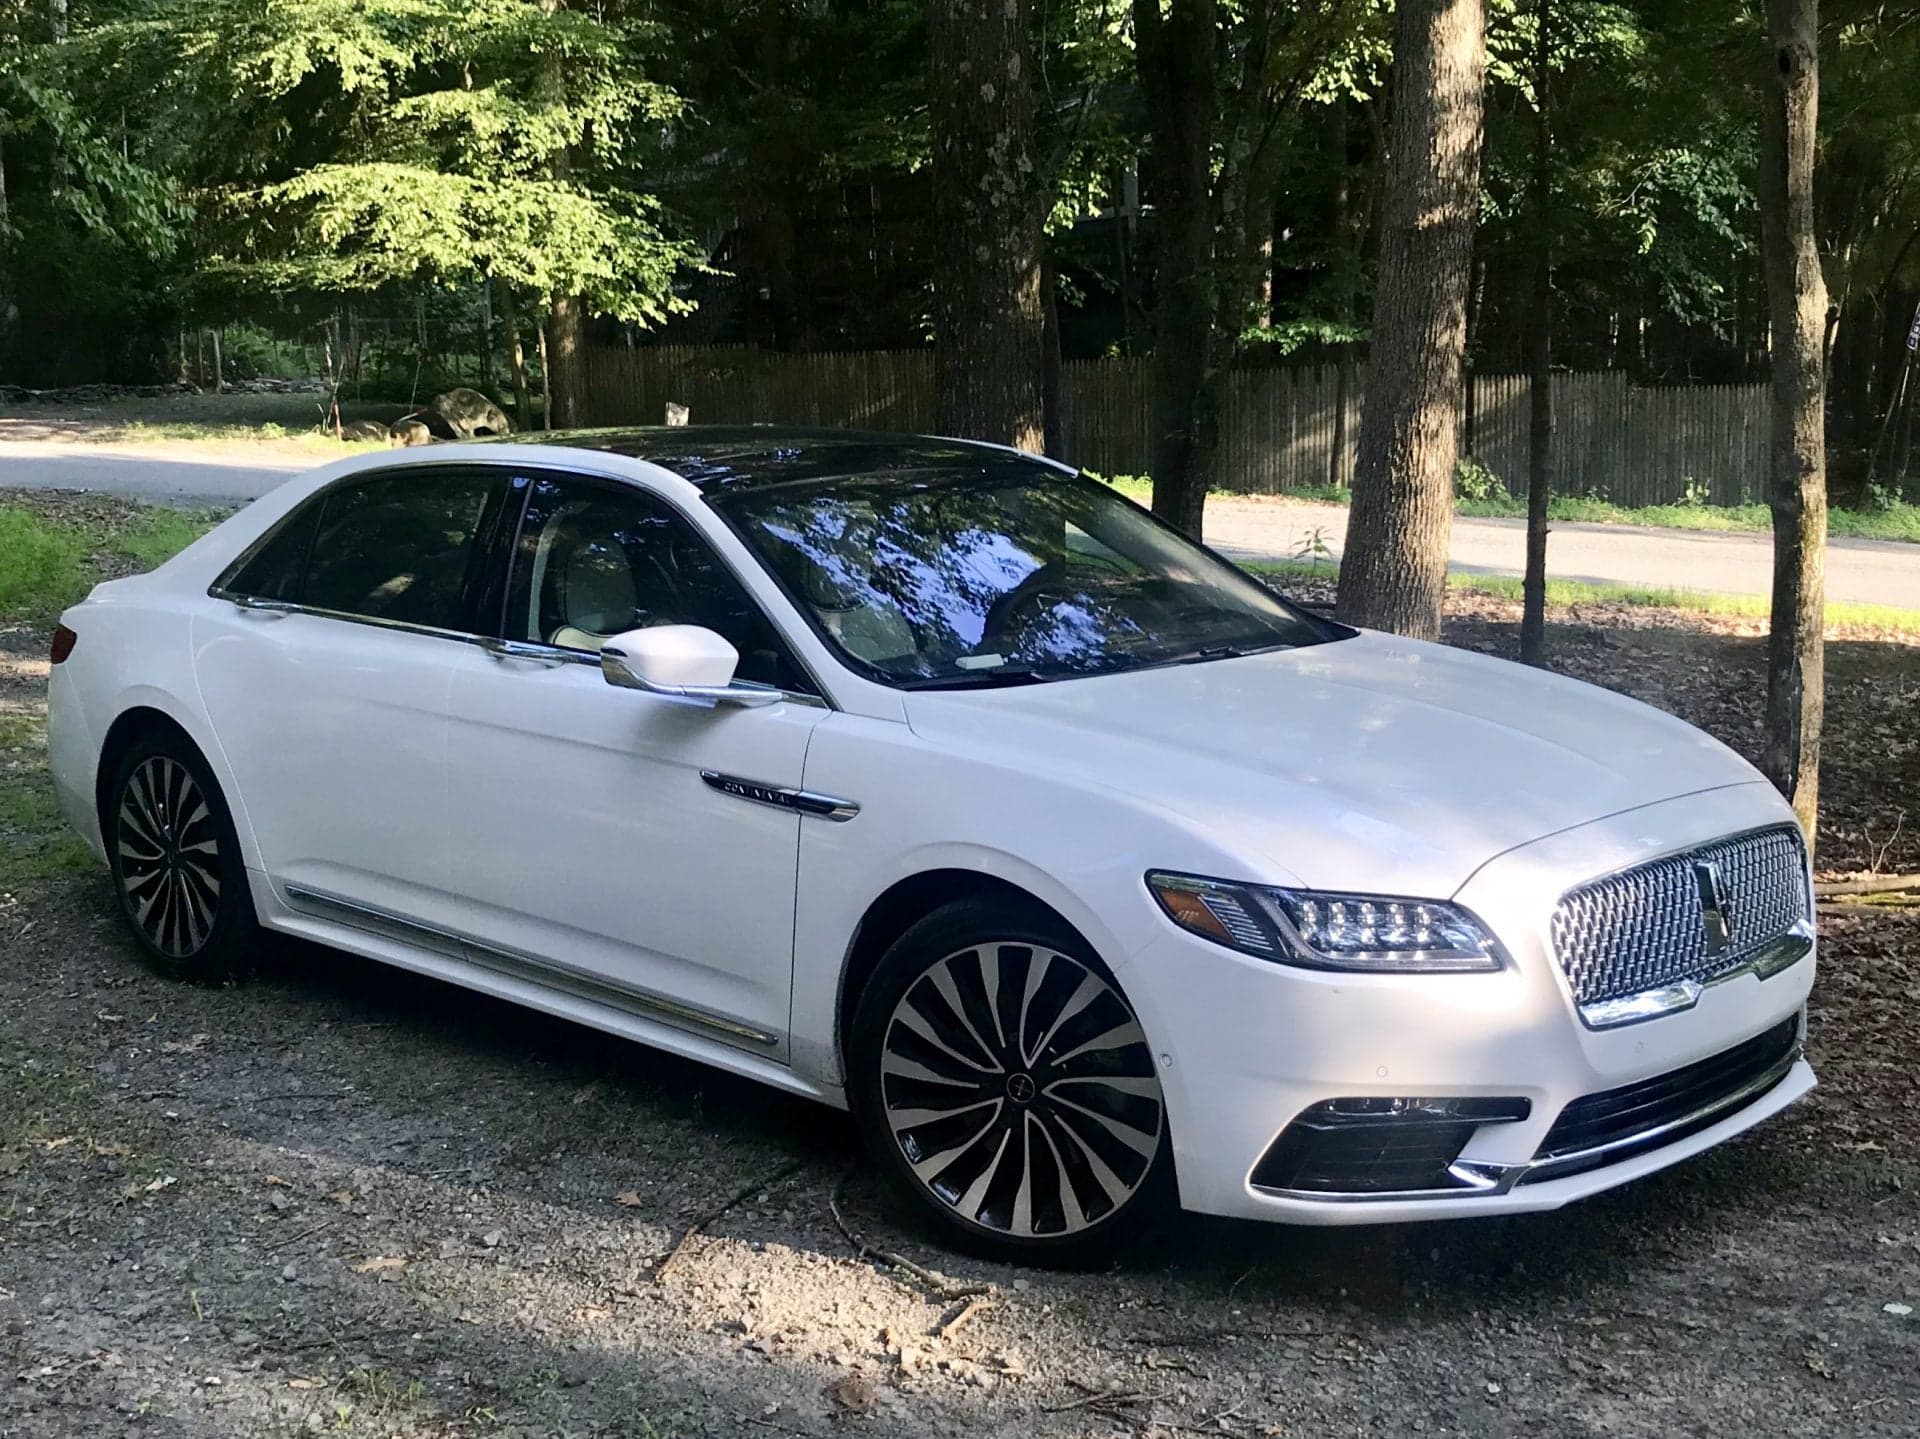 2018 Lincoln Continental Group Review: a High-Tech Take on the Big, Comfy American Luxury Sedan